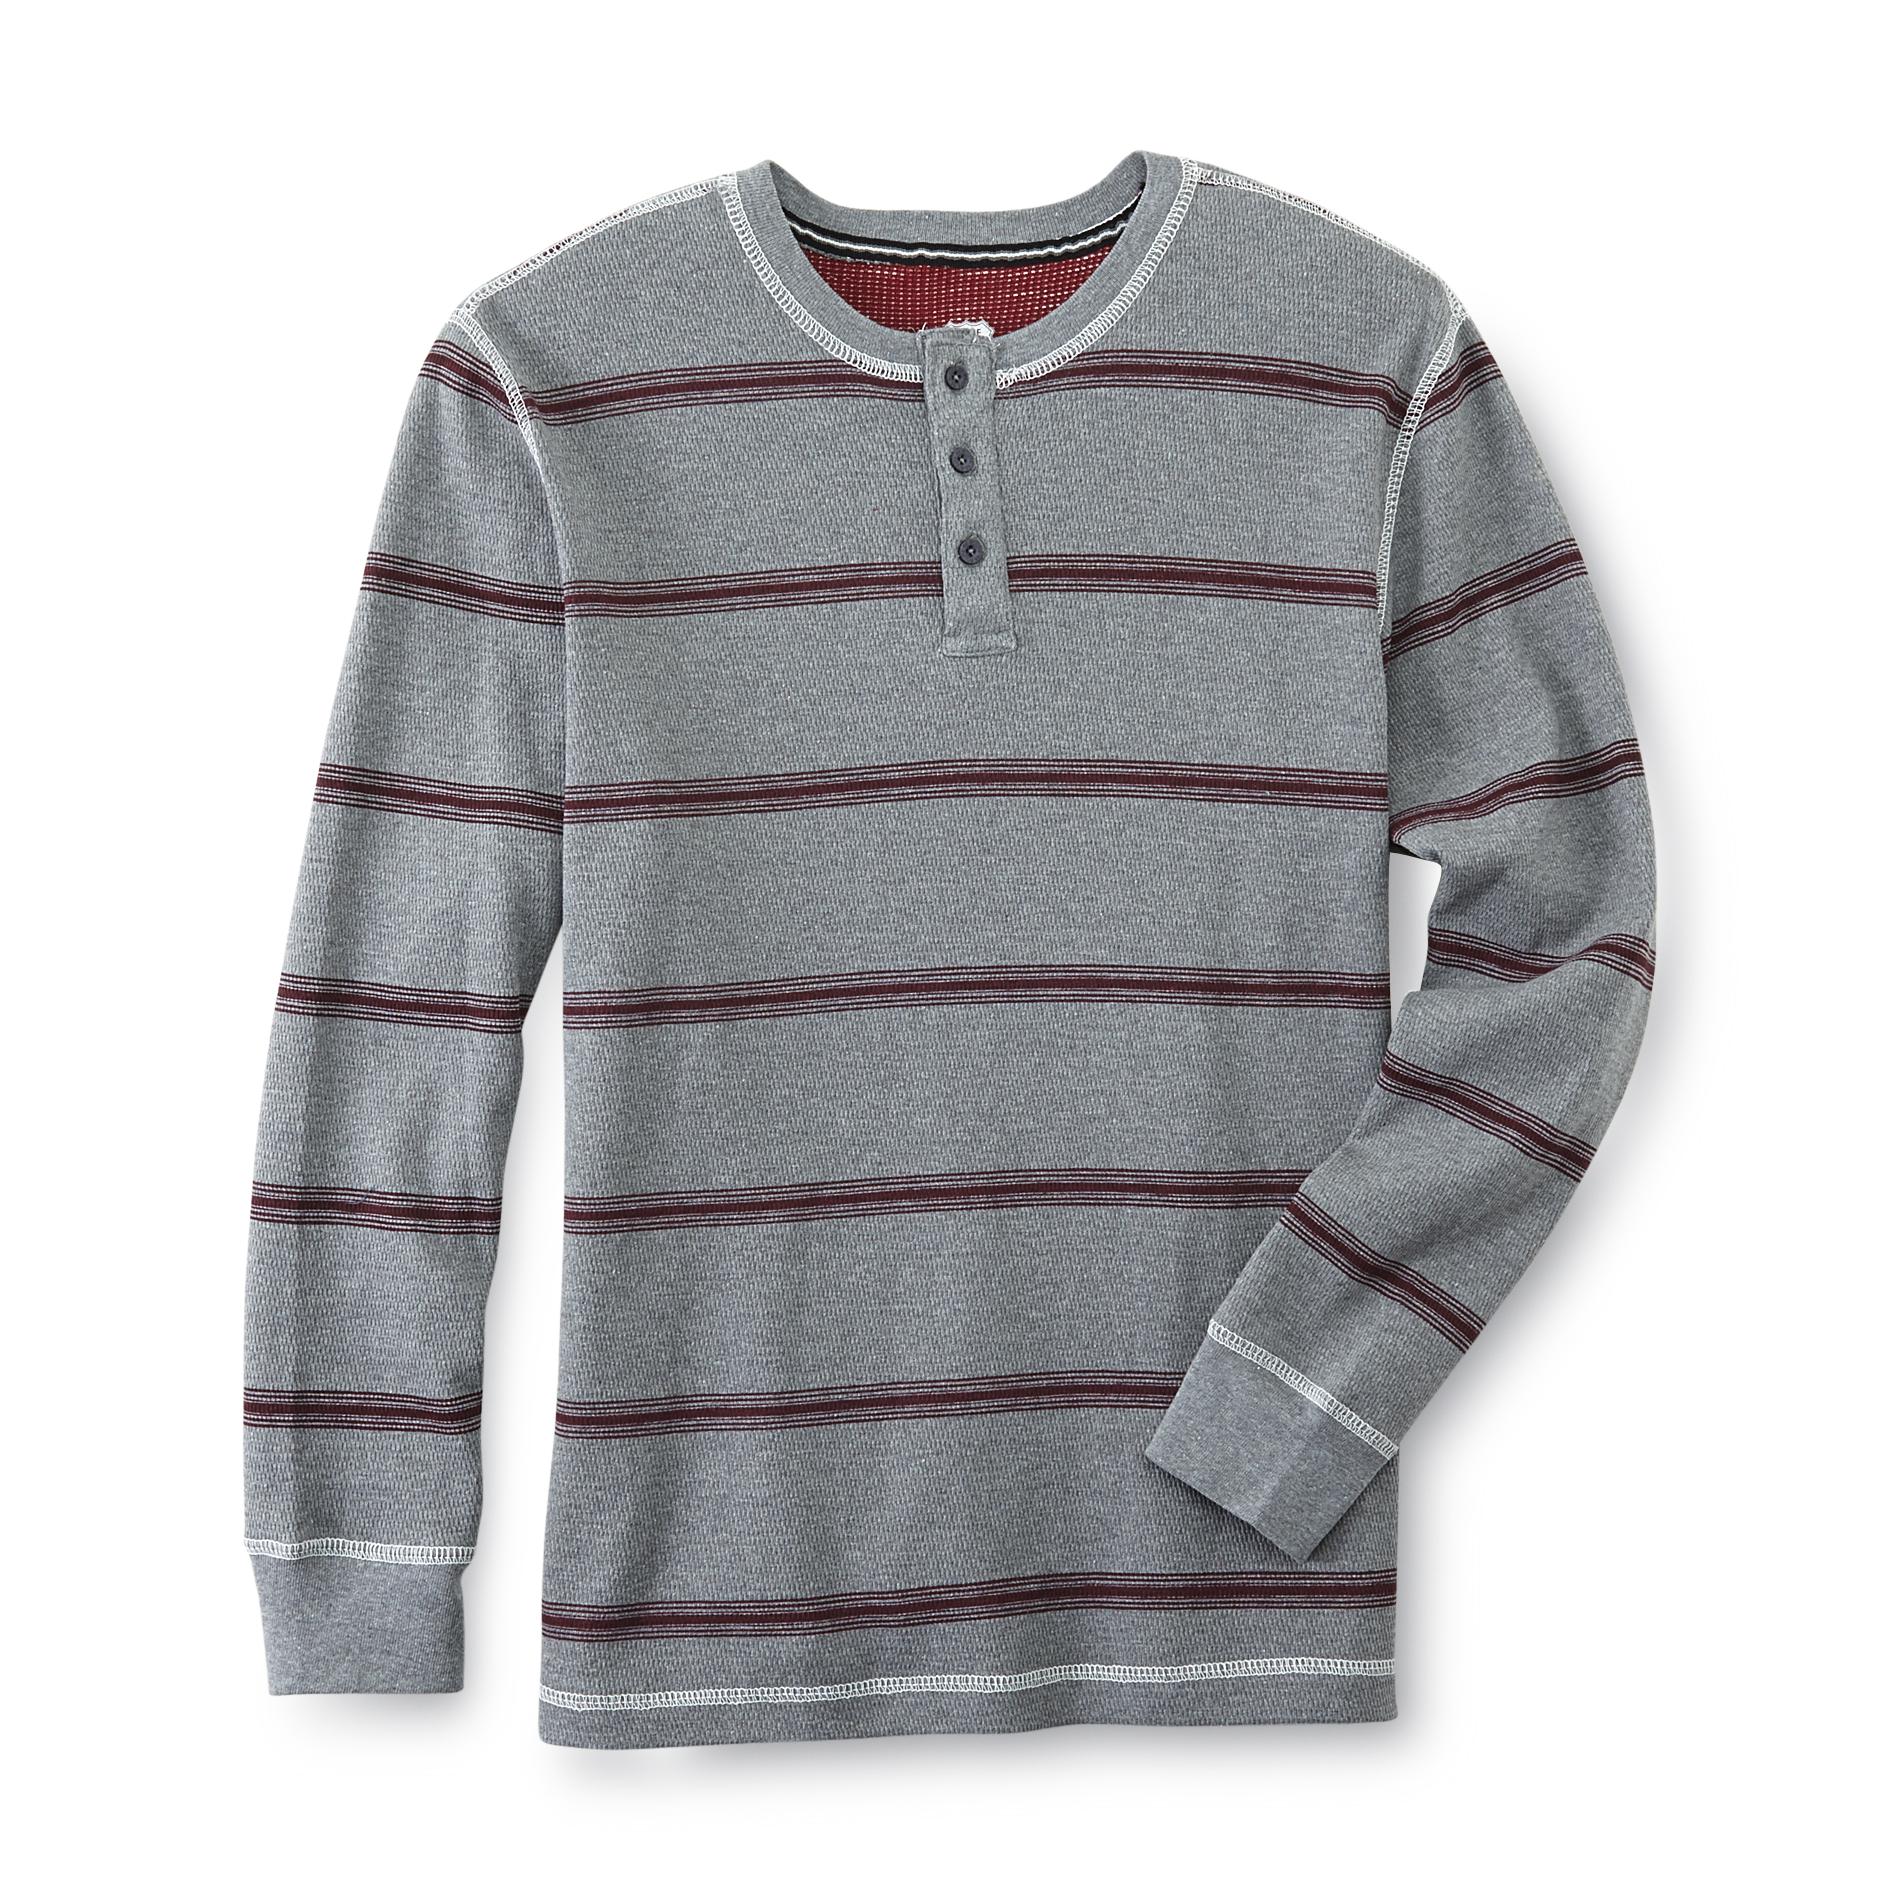 Route 66 Men's Thermal Henley Shirt - Striped